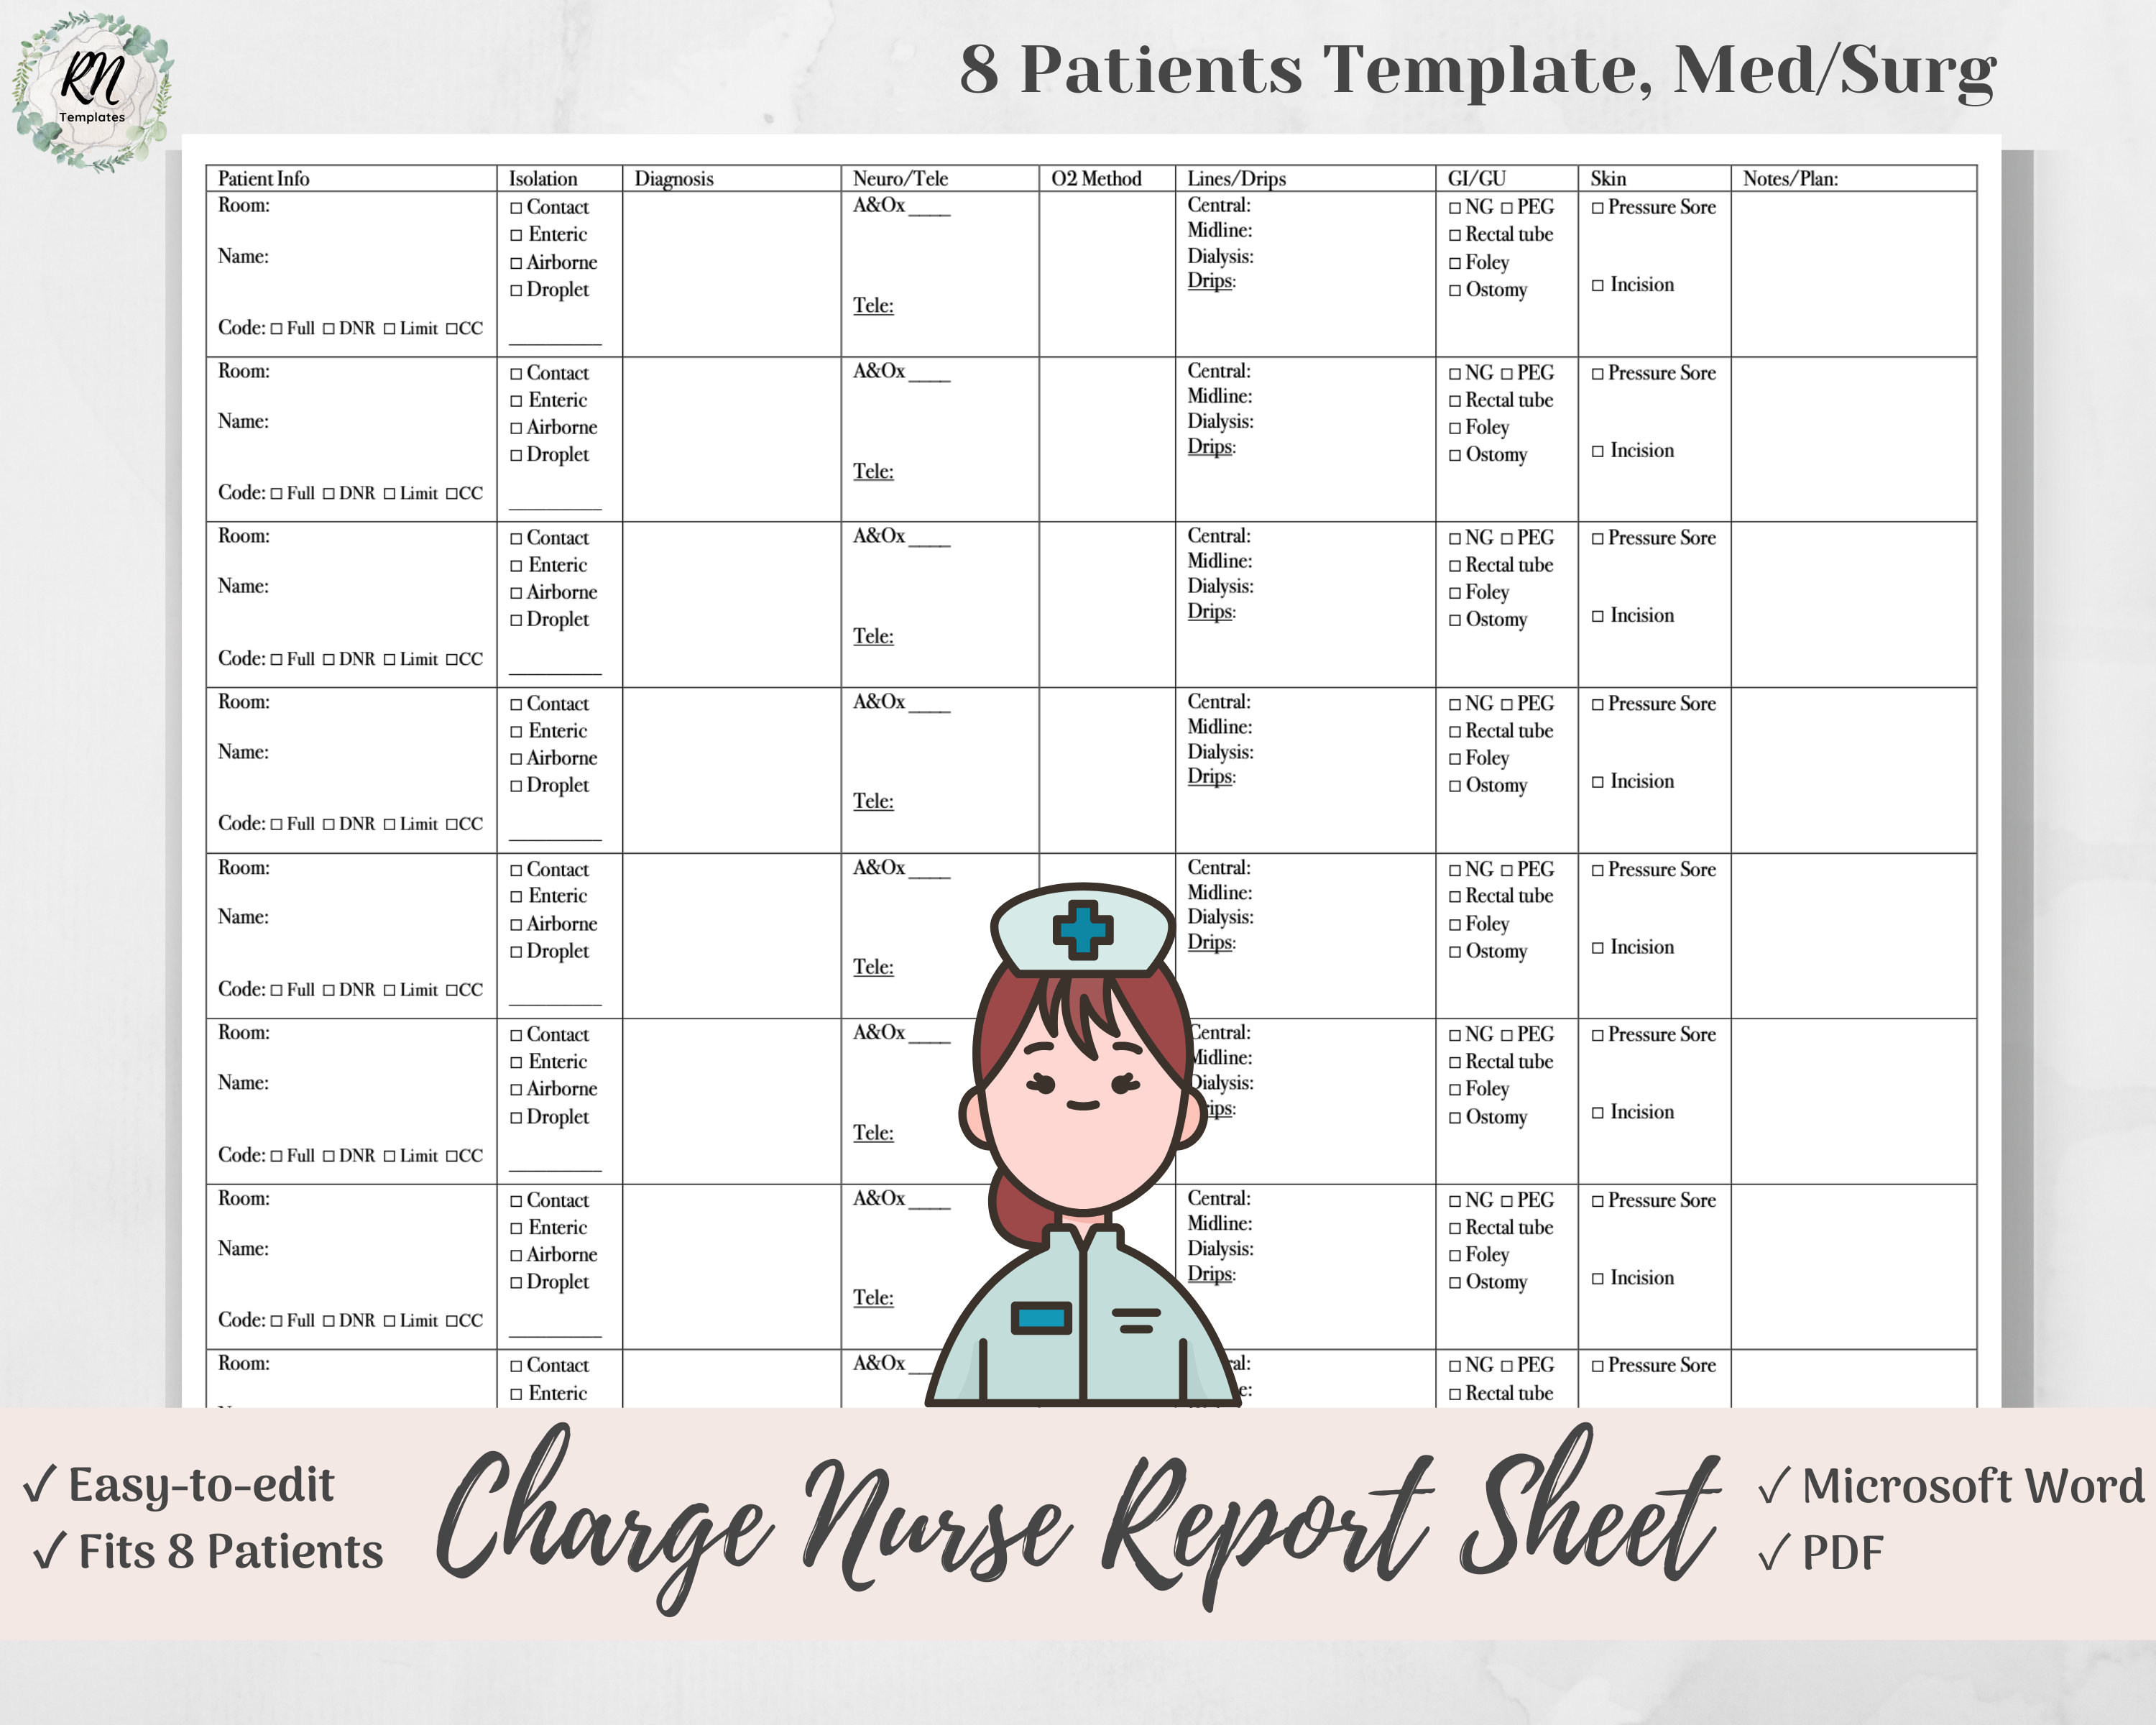 assignment of charge nurse